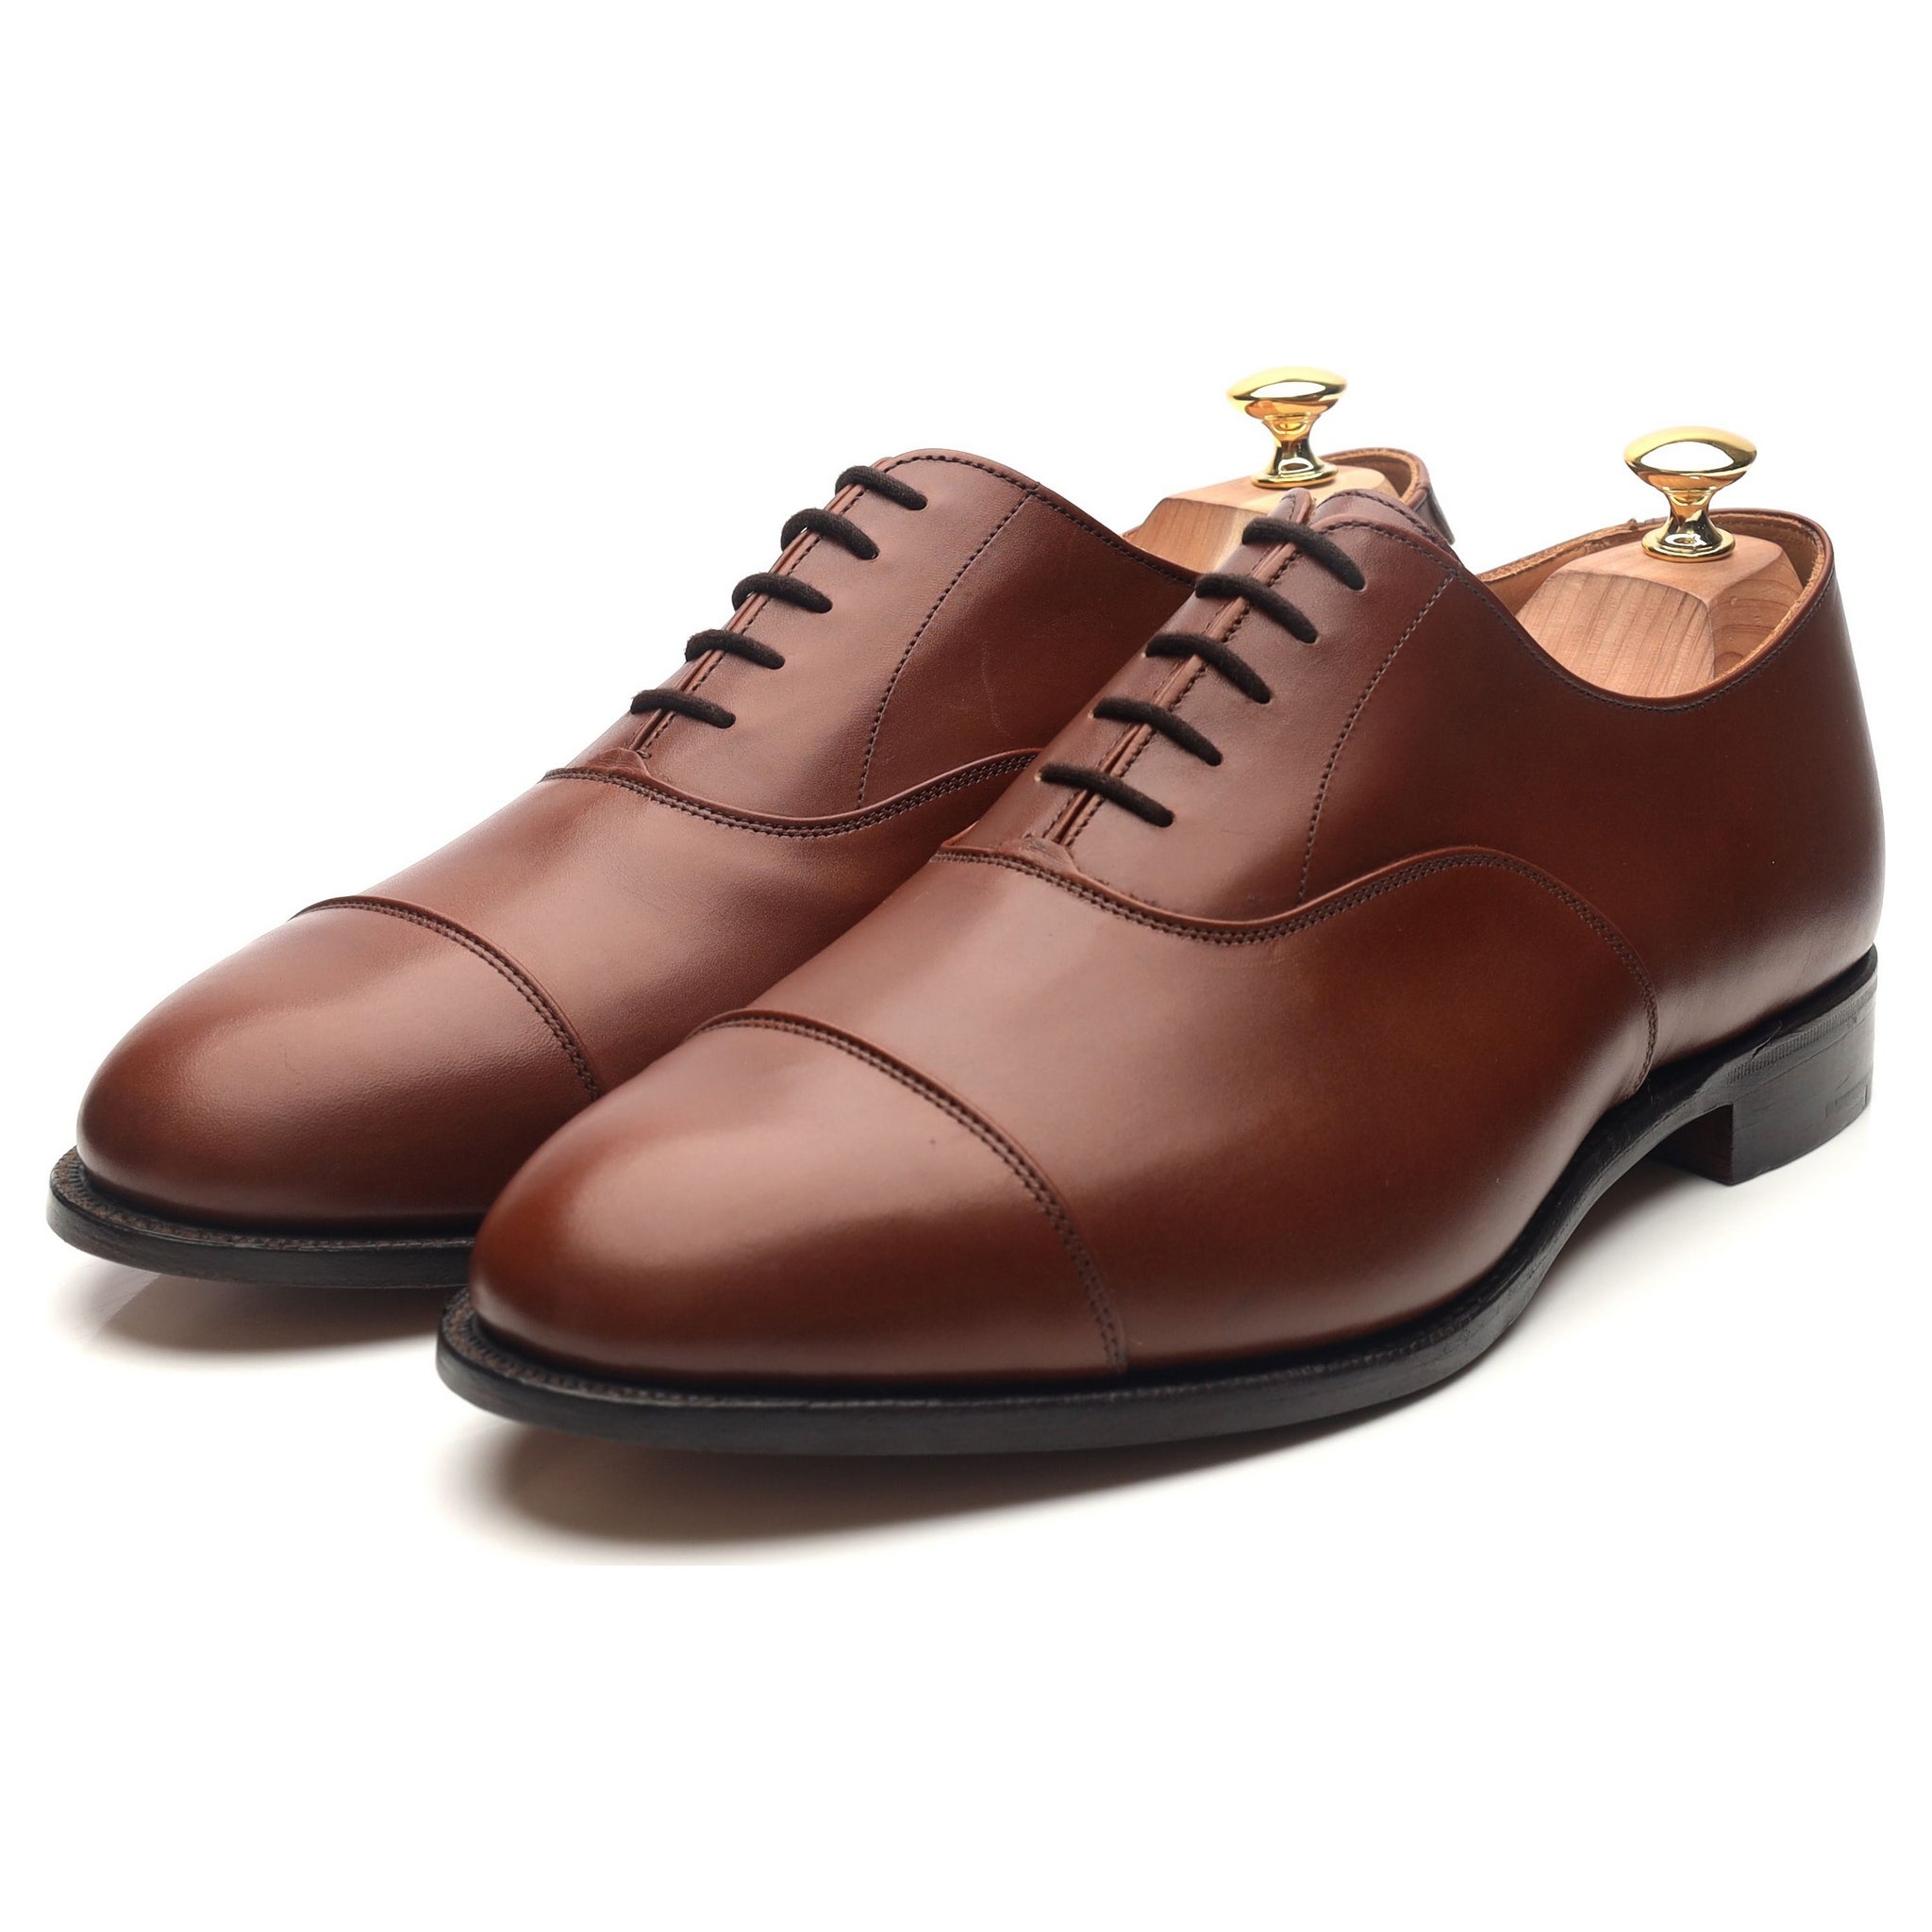 Henley' Tan Brown Leather Oxford UK 11.5 - Abbot's Shoes